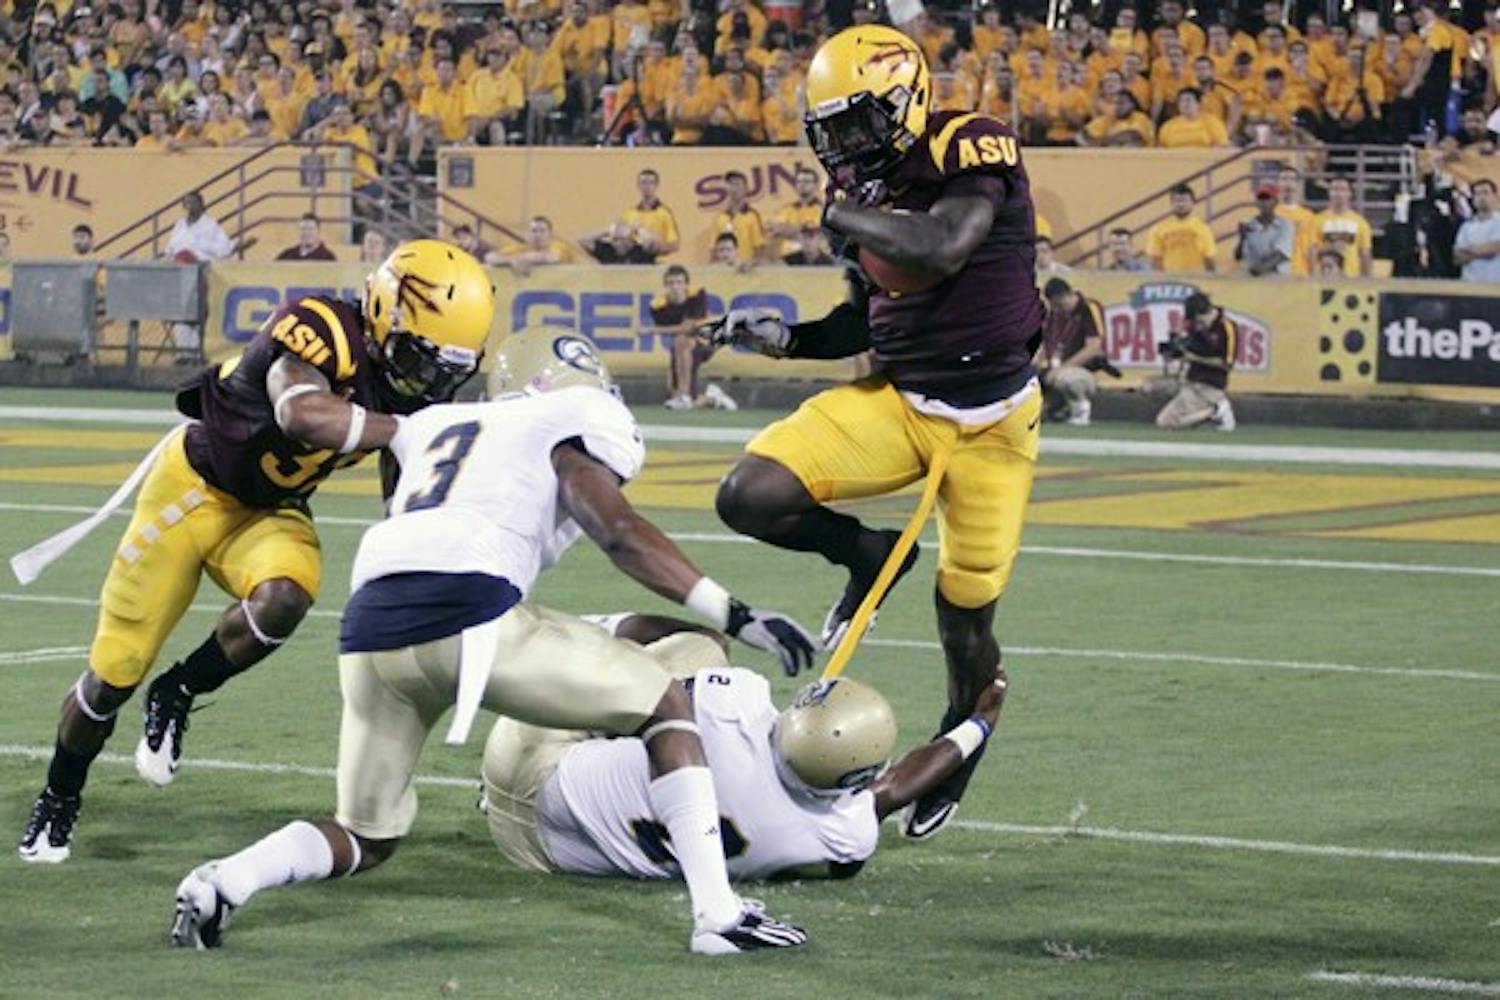 STRONG OUT WIDE: ASU senior wide receiver Mike Willie tries to jump over a pair of UC Davis defenders during the Sun Devils’ victory on Sept. 1. ASU’s depth at wide receiver could be a key factor during Saturday’s matchup against Illinois. (Photo by Beth Easterbrook)